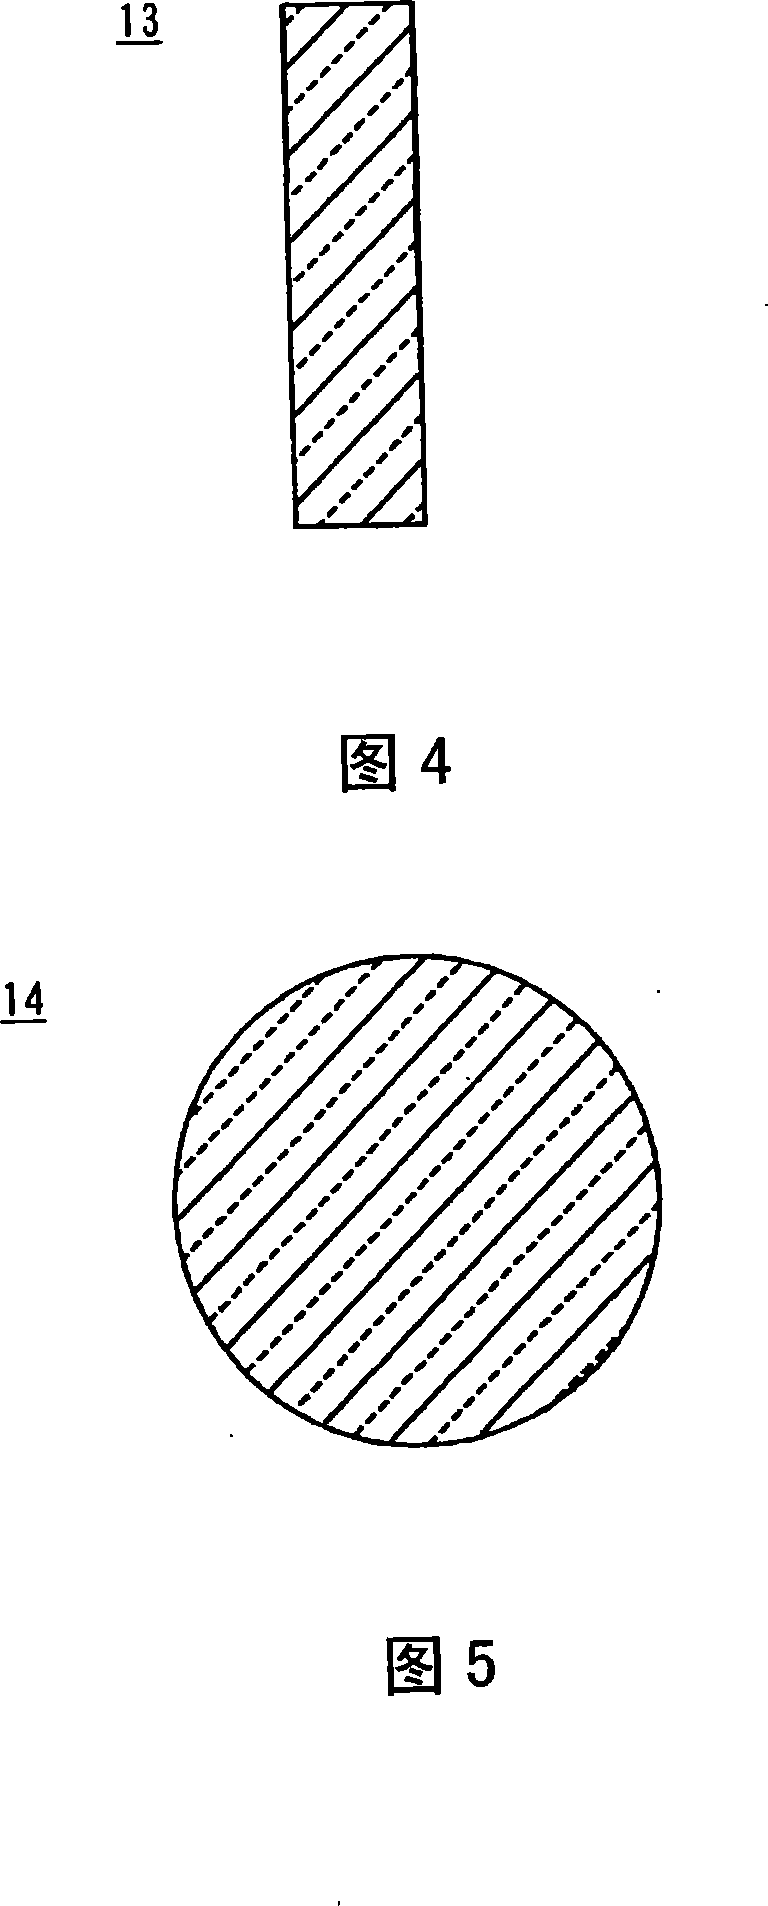 Translucent ceramic, method for manufacturing the same, optical component, and optical device